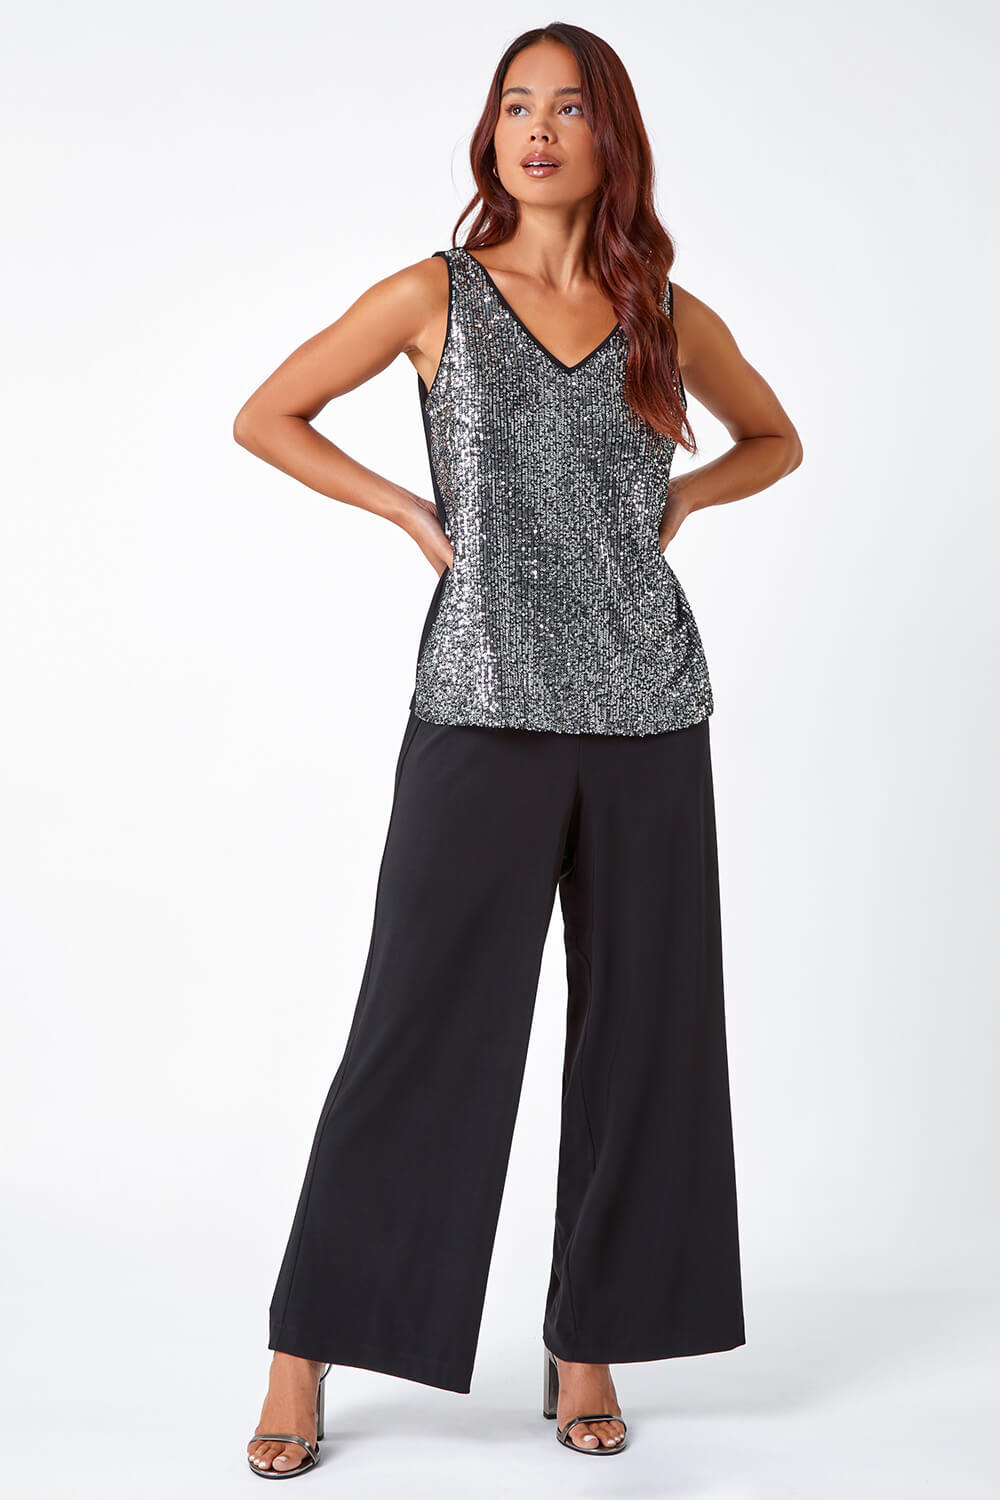 Silver Petite Sequin Stretch Vest Top, Image 2 of 5